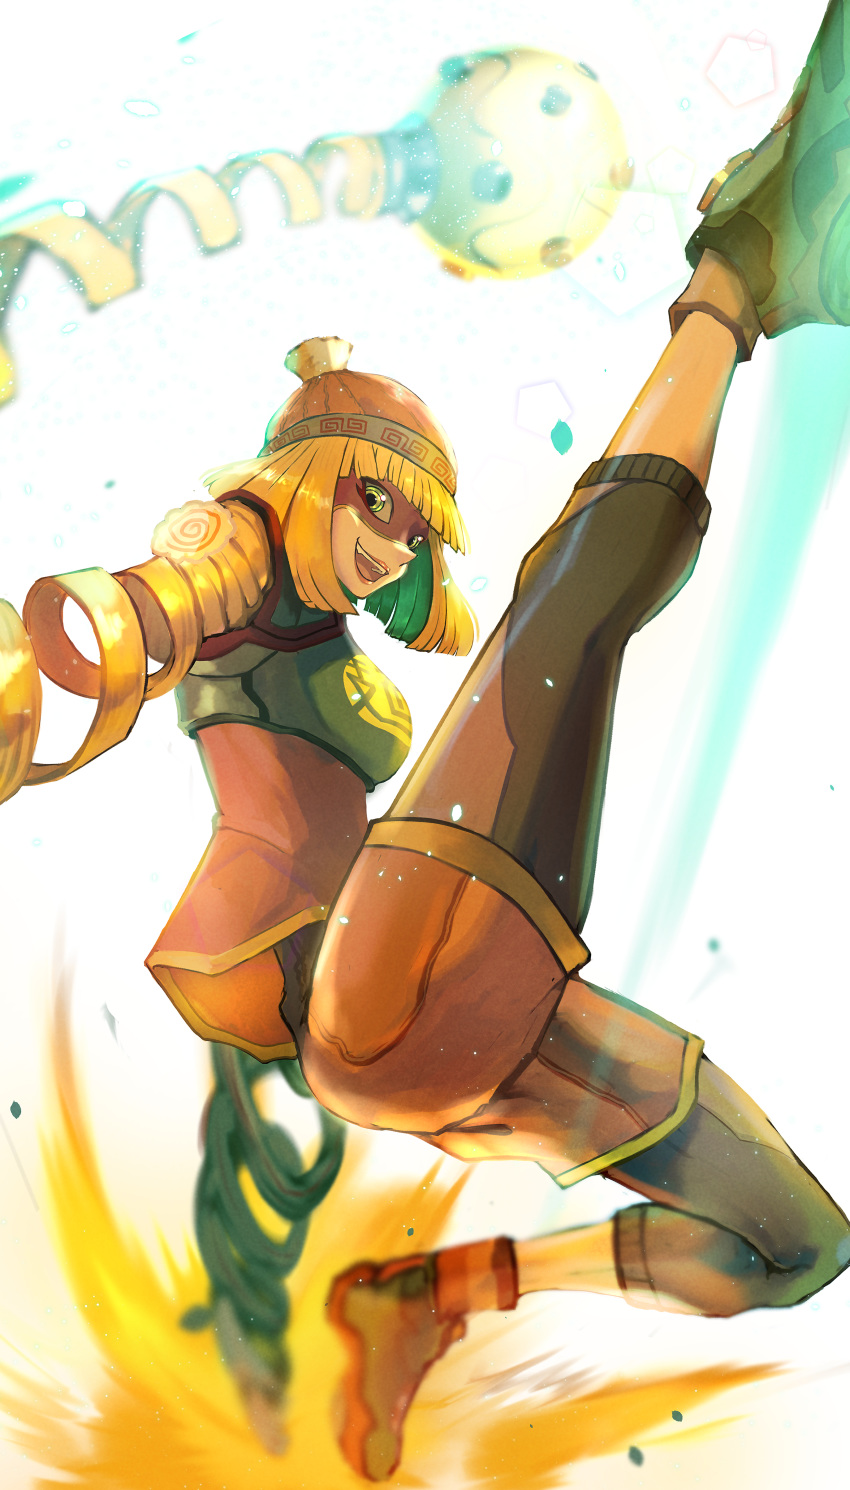 1girl :d absurdres al_bhed_eyes arms_(game) bangs blonde_hair blunt_bangs blunt_ends chuuni227 commentary_request crop_top domino_high_school_uniform flying_kick food from_below green_eyes green_footwear green_shirt highres kamaboko kicking knit_hat layered_clothing leg_up legwear_under_shorts lipstick looking_down makeup meandros megawatt_(arms) min_min_(arms) multicolored multicolored_clothes multicolored_headwear narutomaki open_mouth orange_headwear orange_shorts pantyhose print_headwear school_uniform shirt shoes short_hair shorts simple_background smile sneakers socks solo white_background